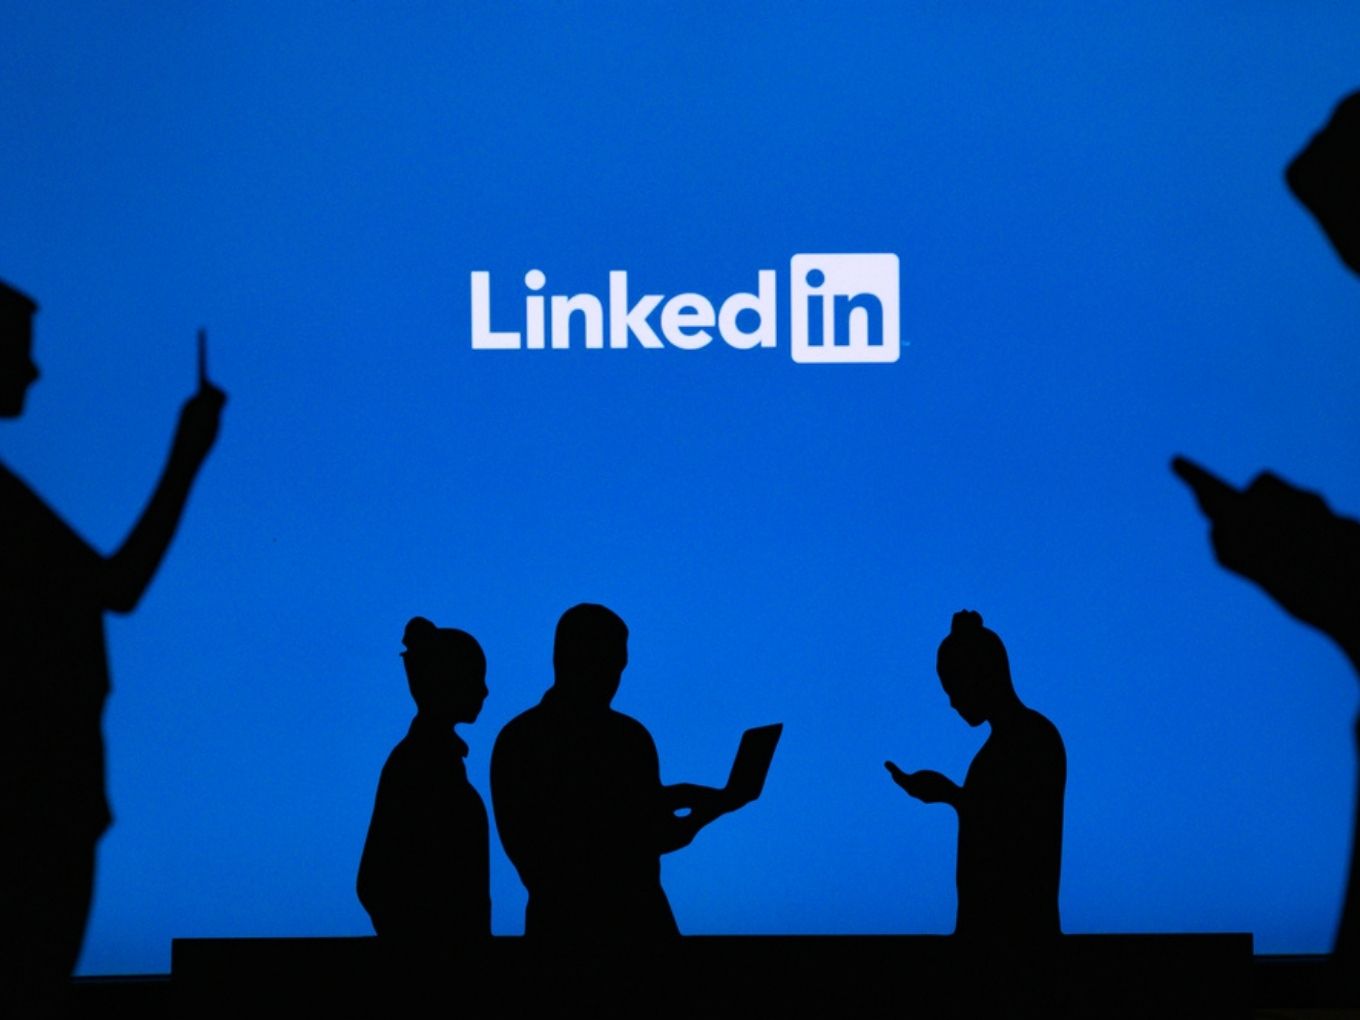 LinkedIn Launches Stories In India, Bets On Video Chat & Messaging